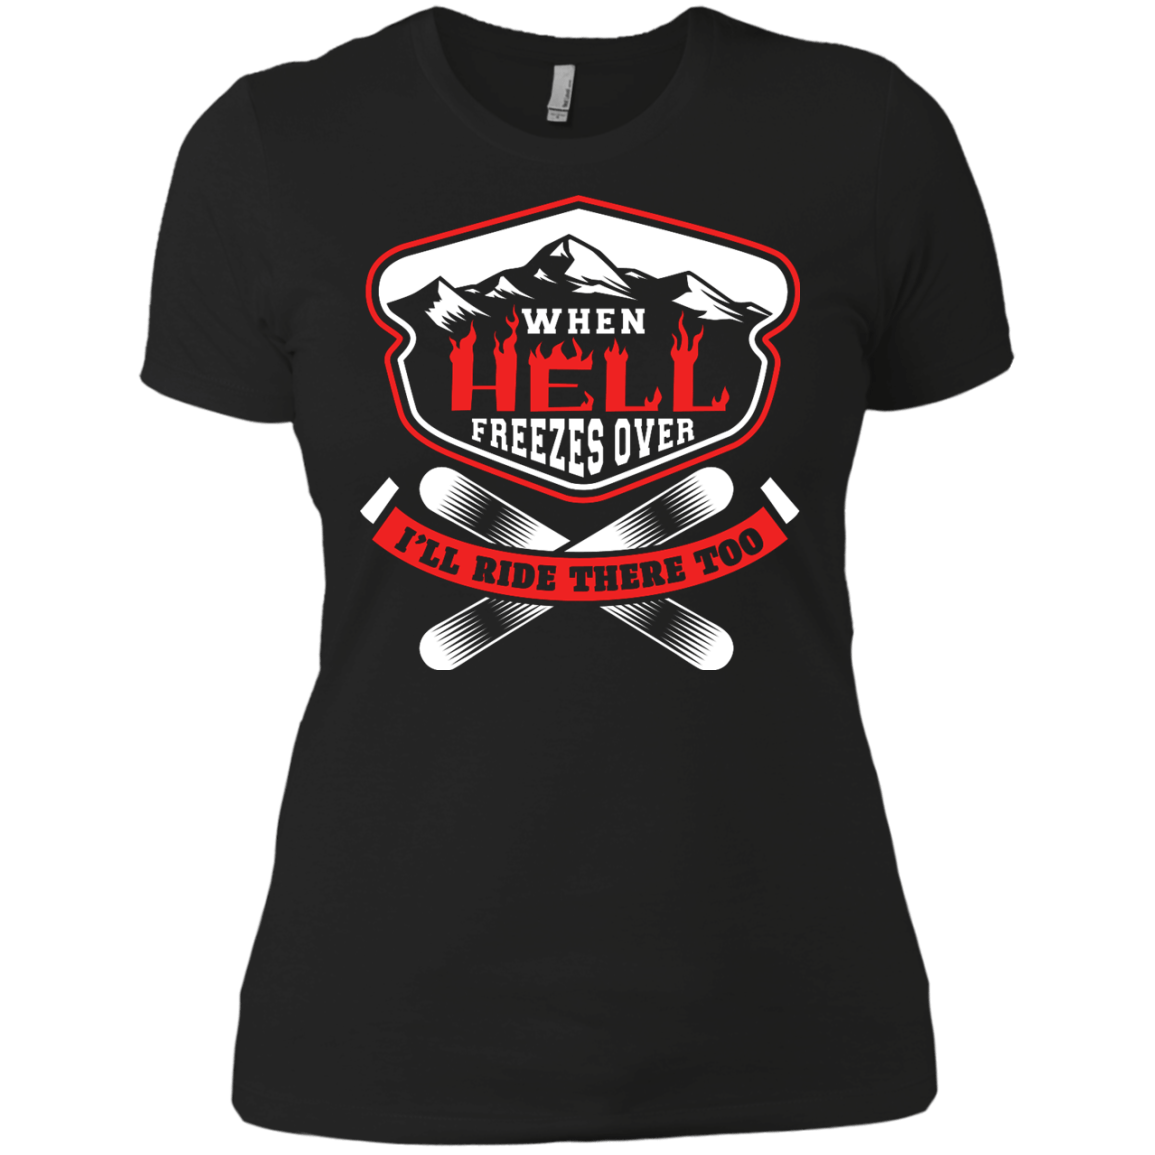 When Hell Freezes Over I'll Ride There Too Ladies Tees - Powderaddicts